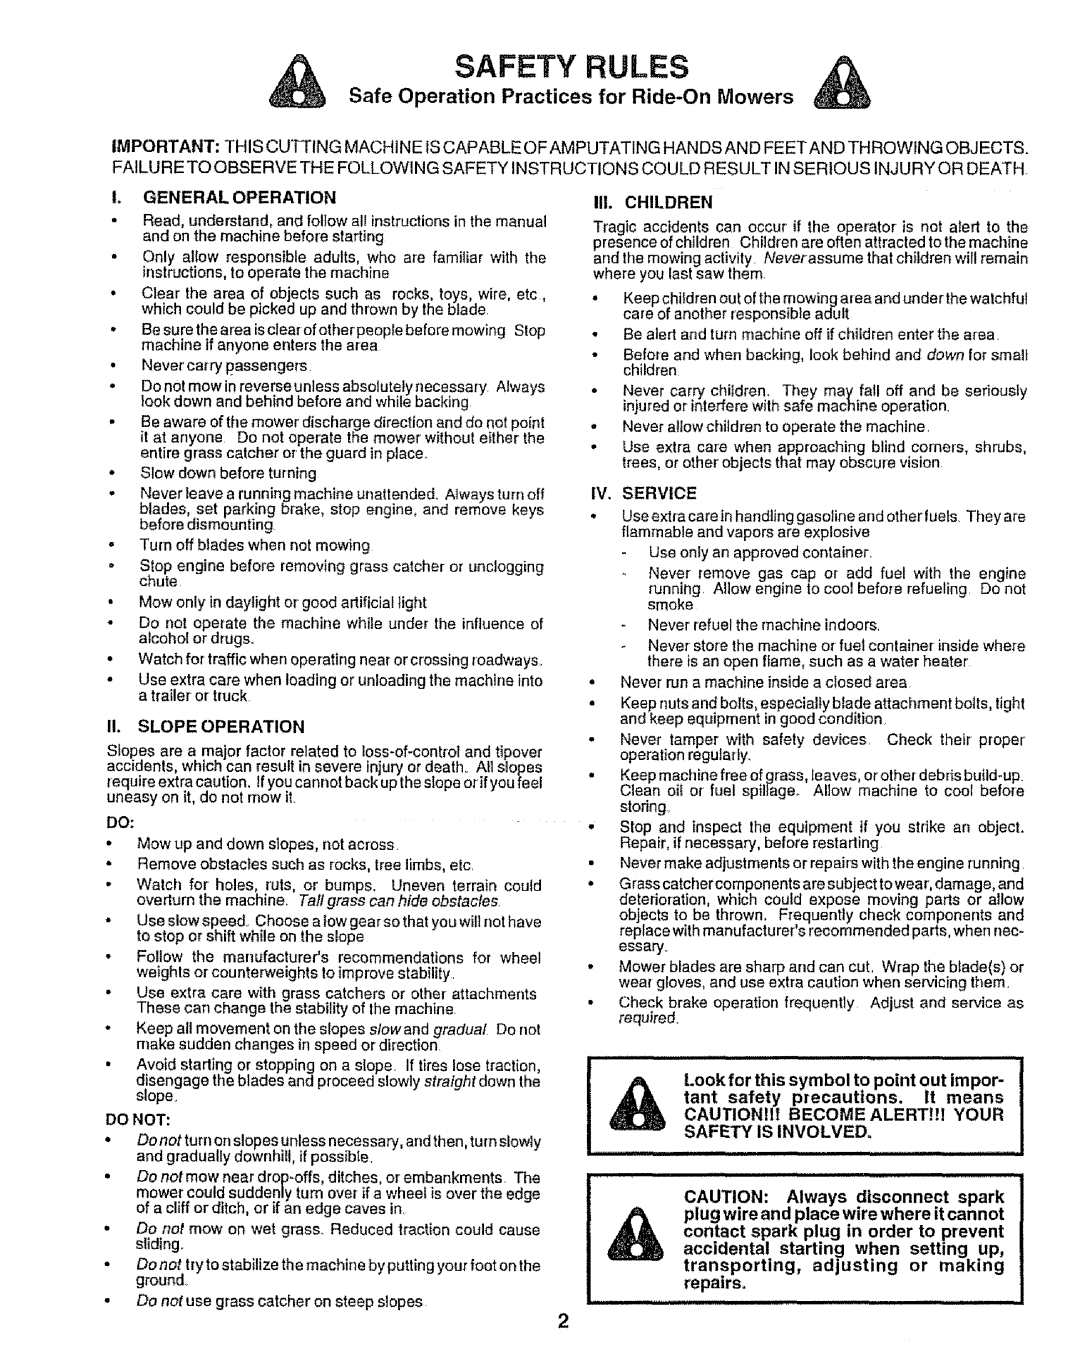 Sears 917.257651 Safety Rules, Safe Operation Practices for Ride-OnMowers, L General Operation, Ii.Slope Operation 